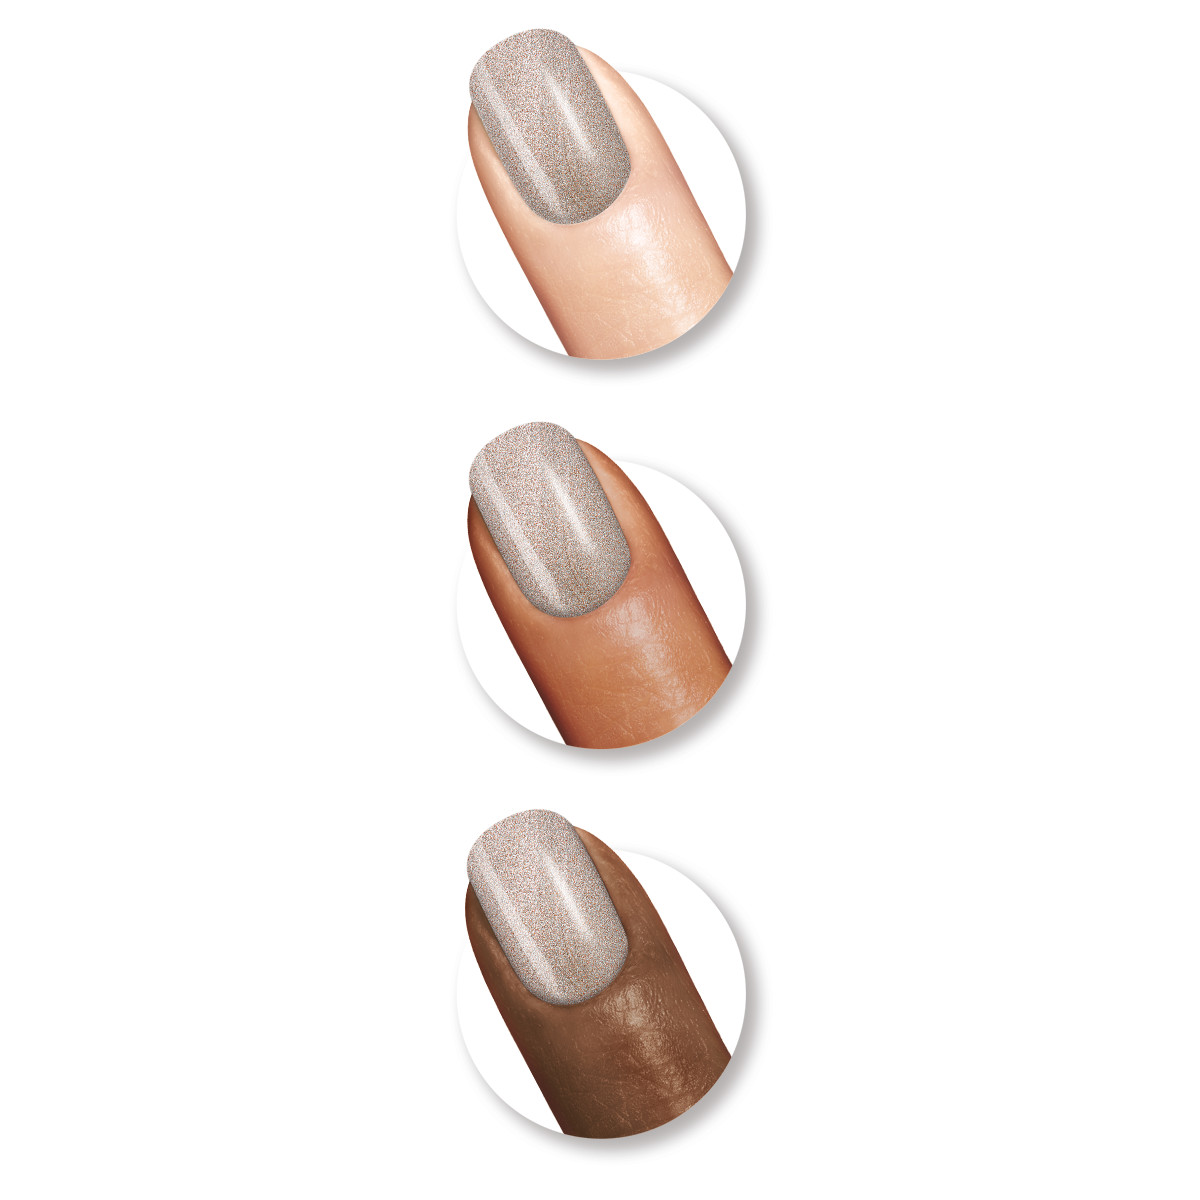 Sally Hansen Complete Salon Manicure Nail Color, Gilty Party - image 3 of 3